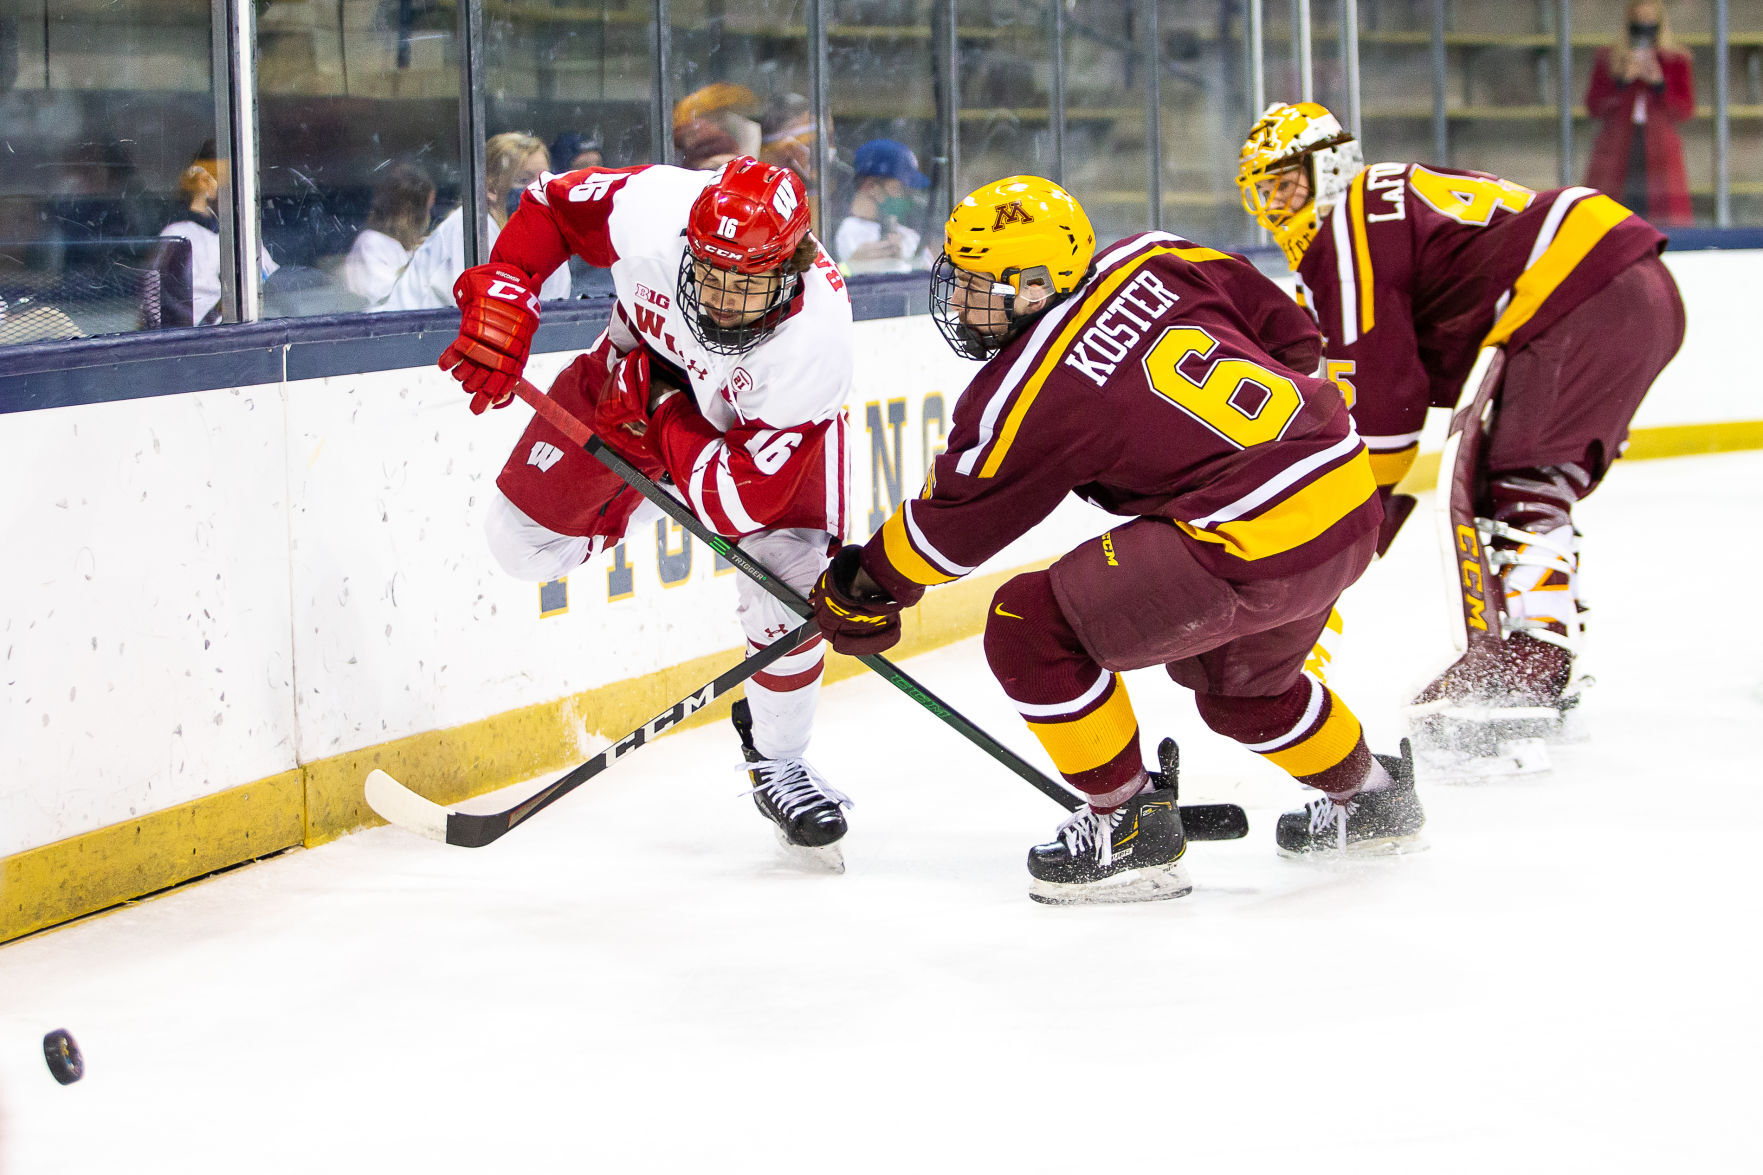 Heres how to watch Wisconsin Badgers mens hockey games in the 2021-22 season